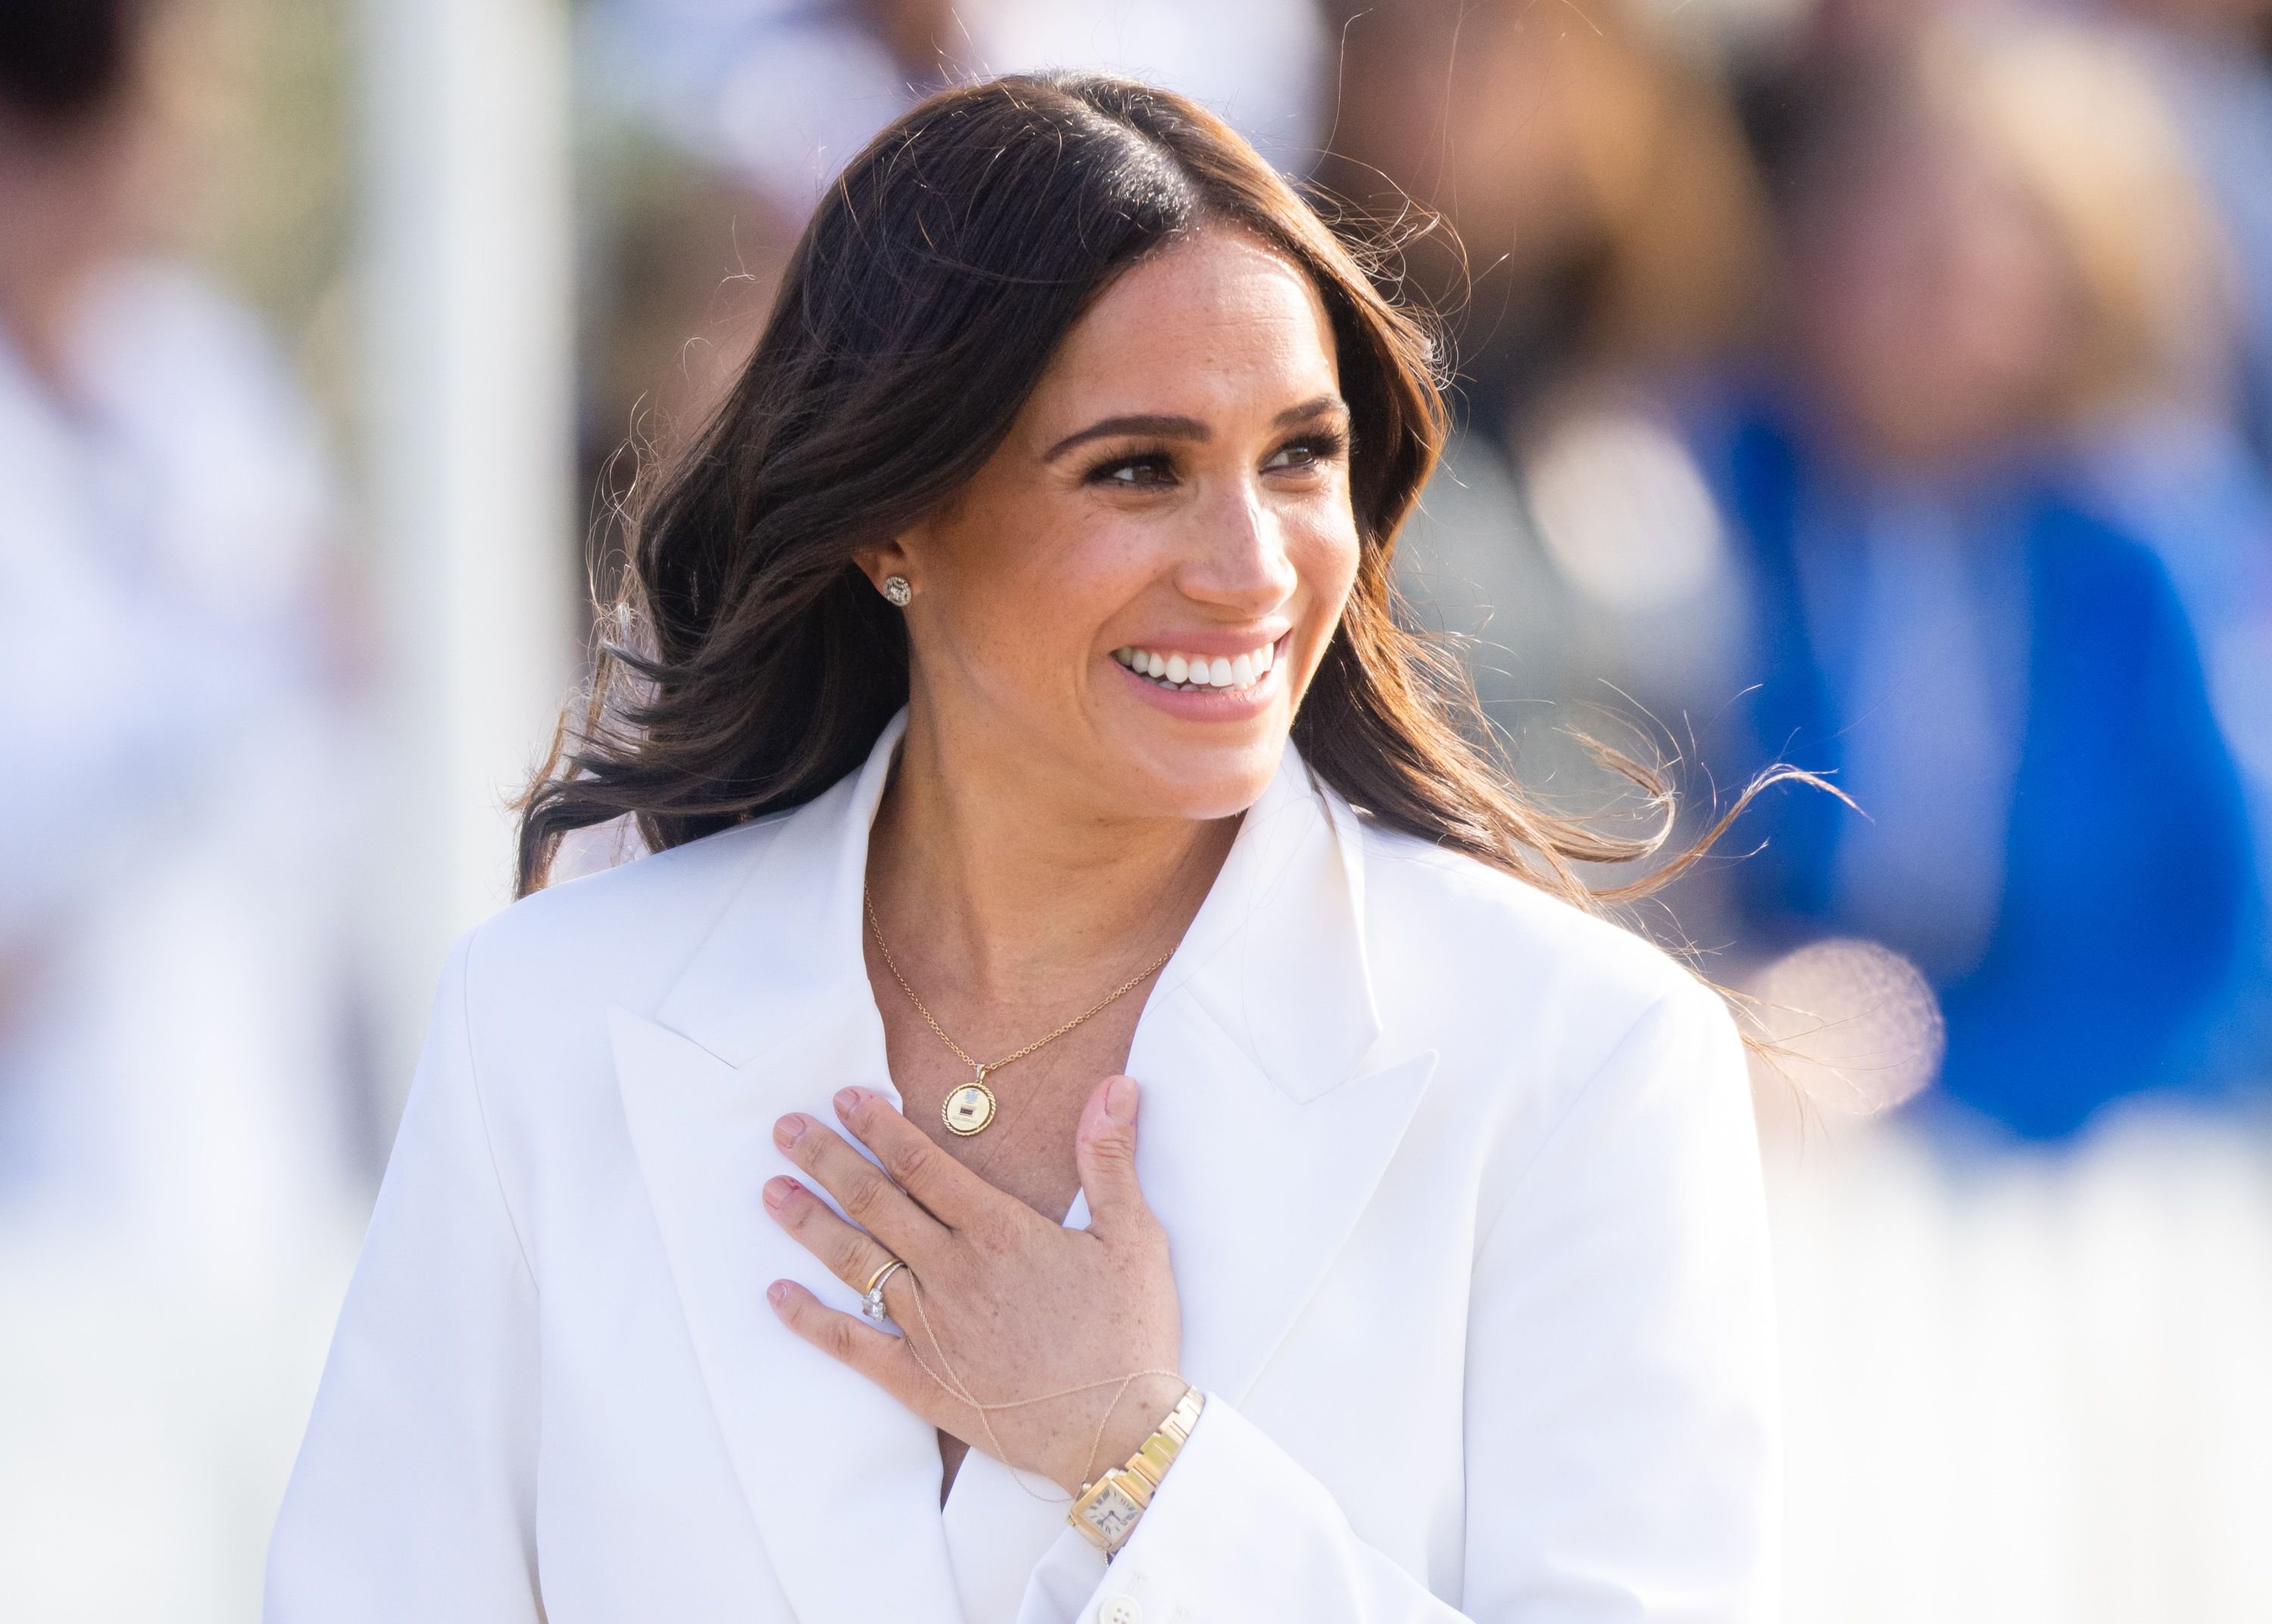 Meghan Markle during a reception for the Invictus Games at Nations Home at Zuiderpark on April 15, 2022 in The Hague, Netherlands. | Source: Getty Images